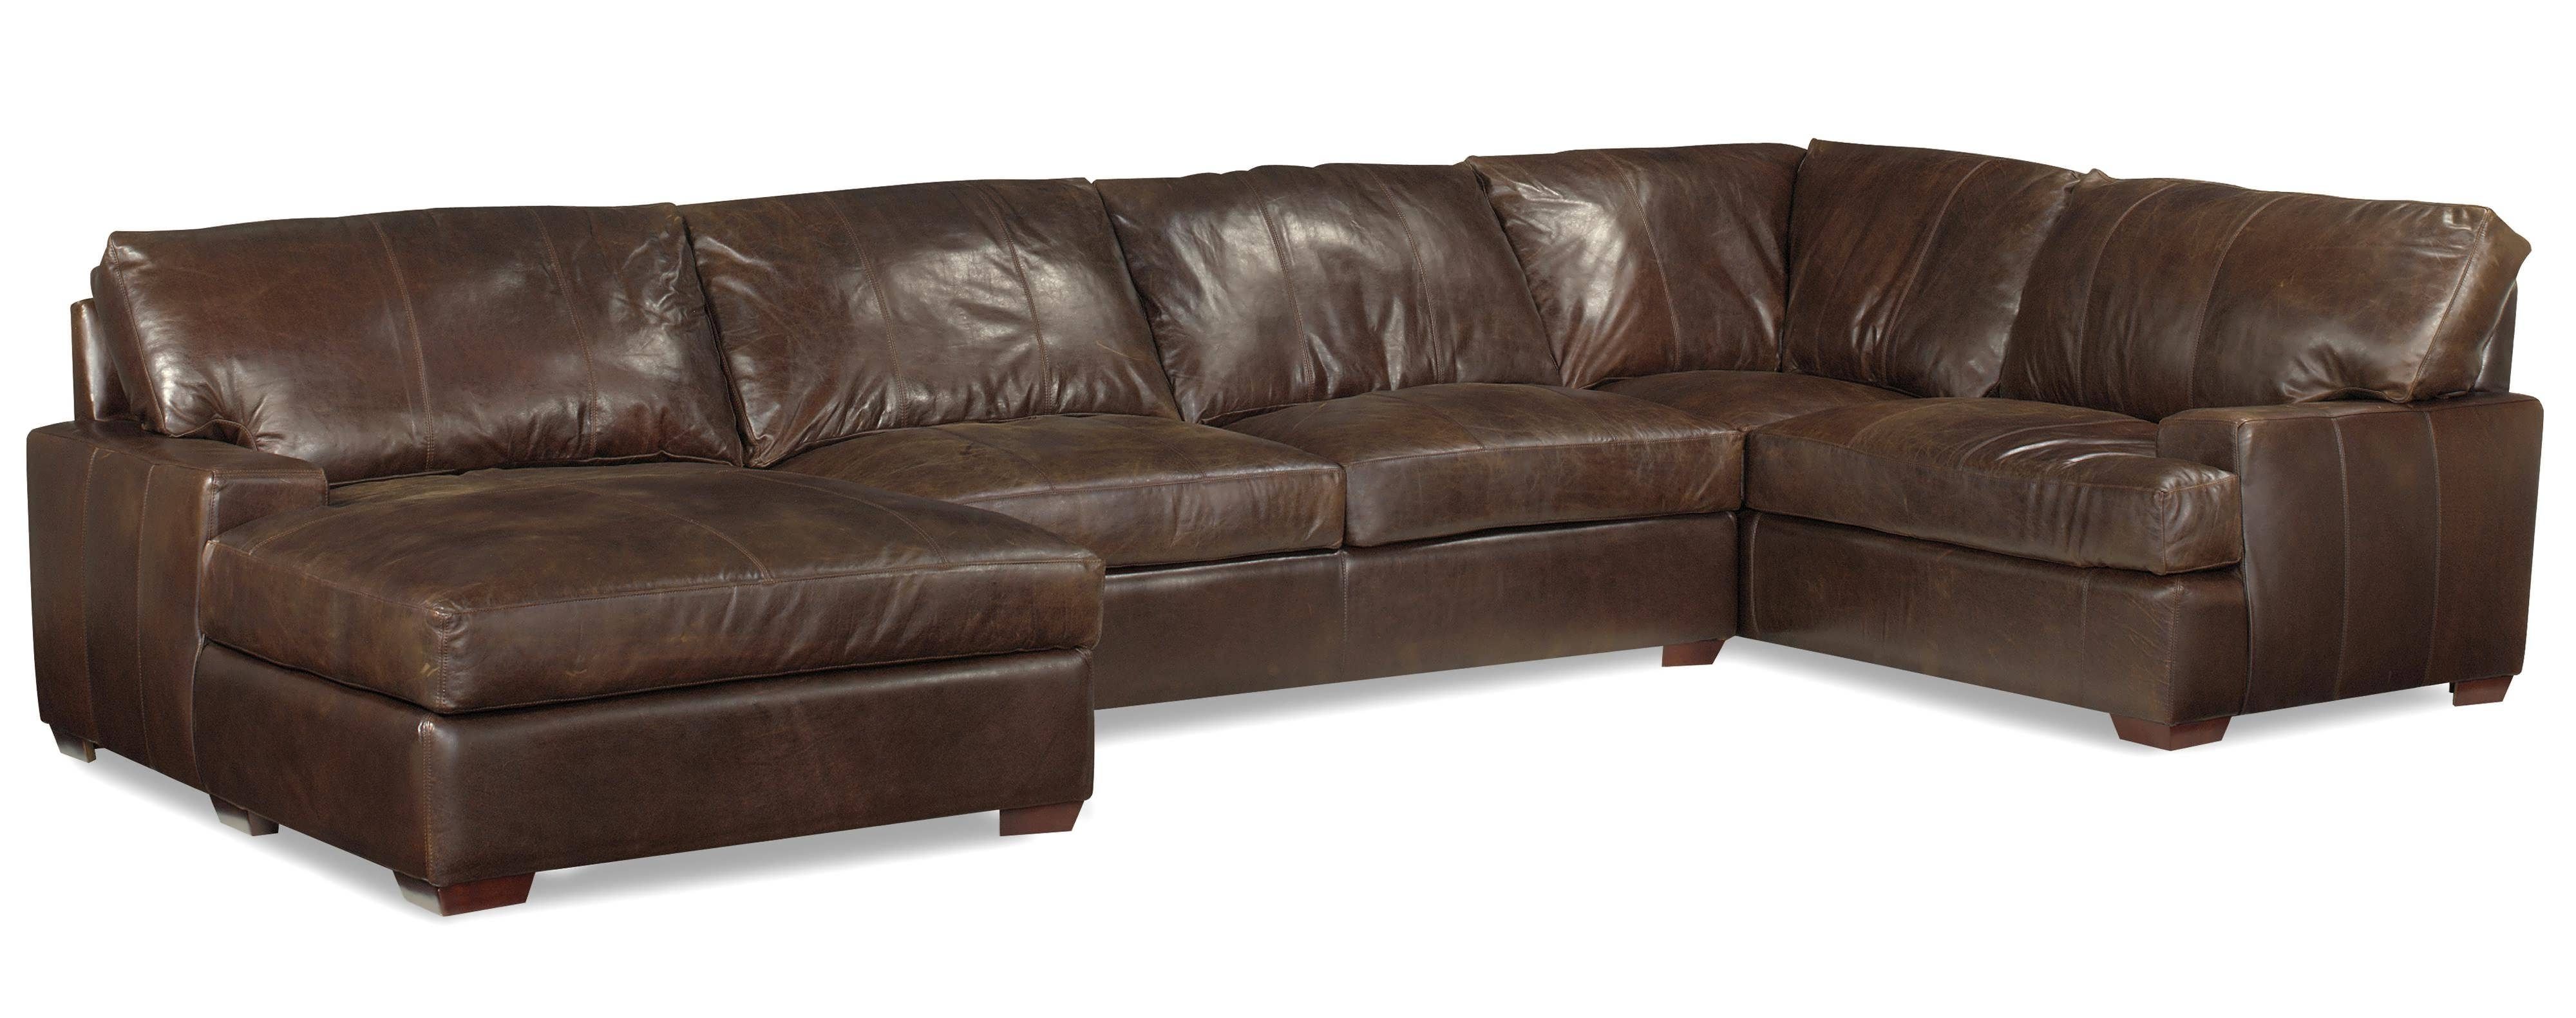 deep leather sectional sofa with chaise